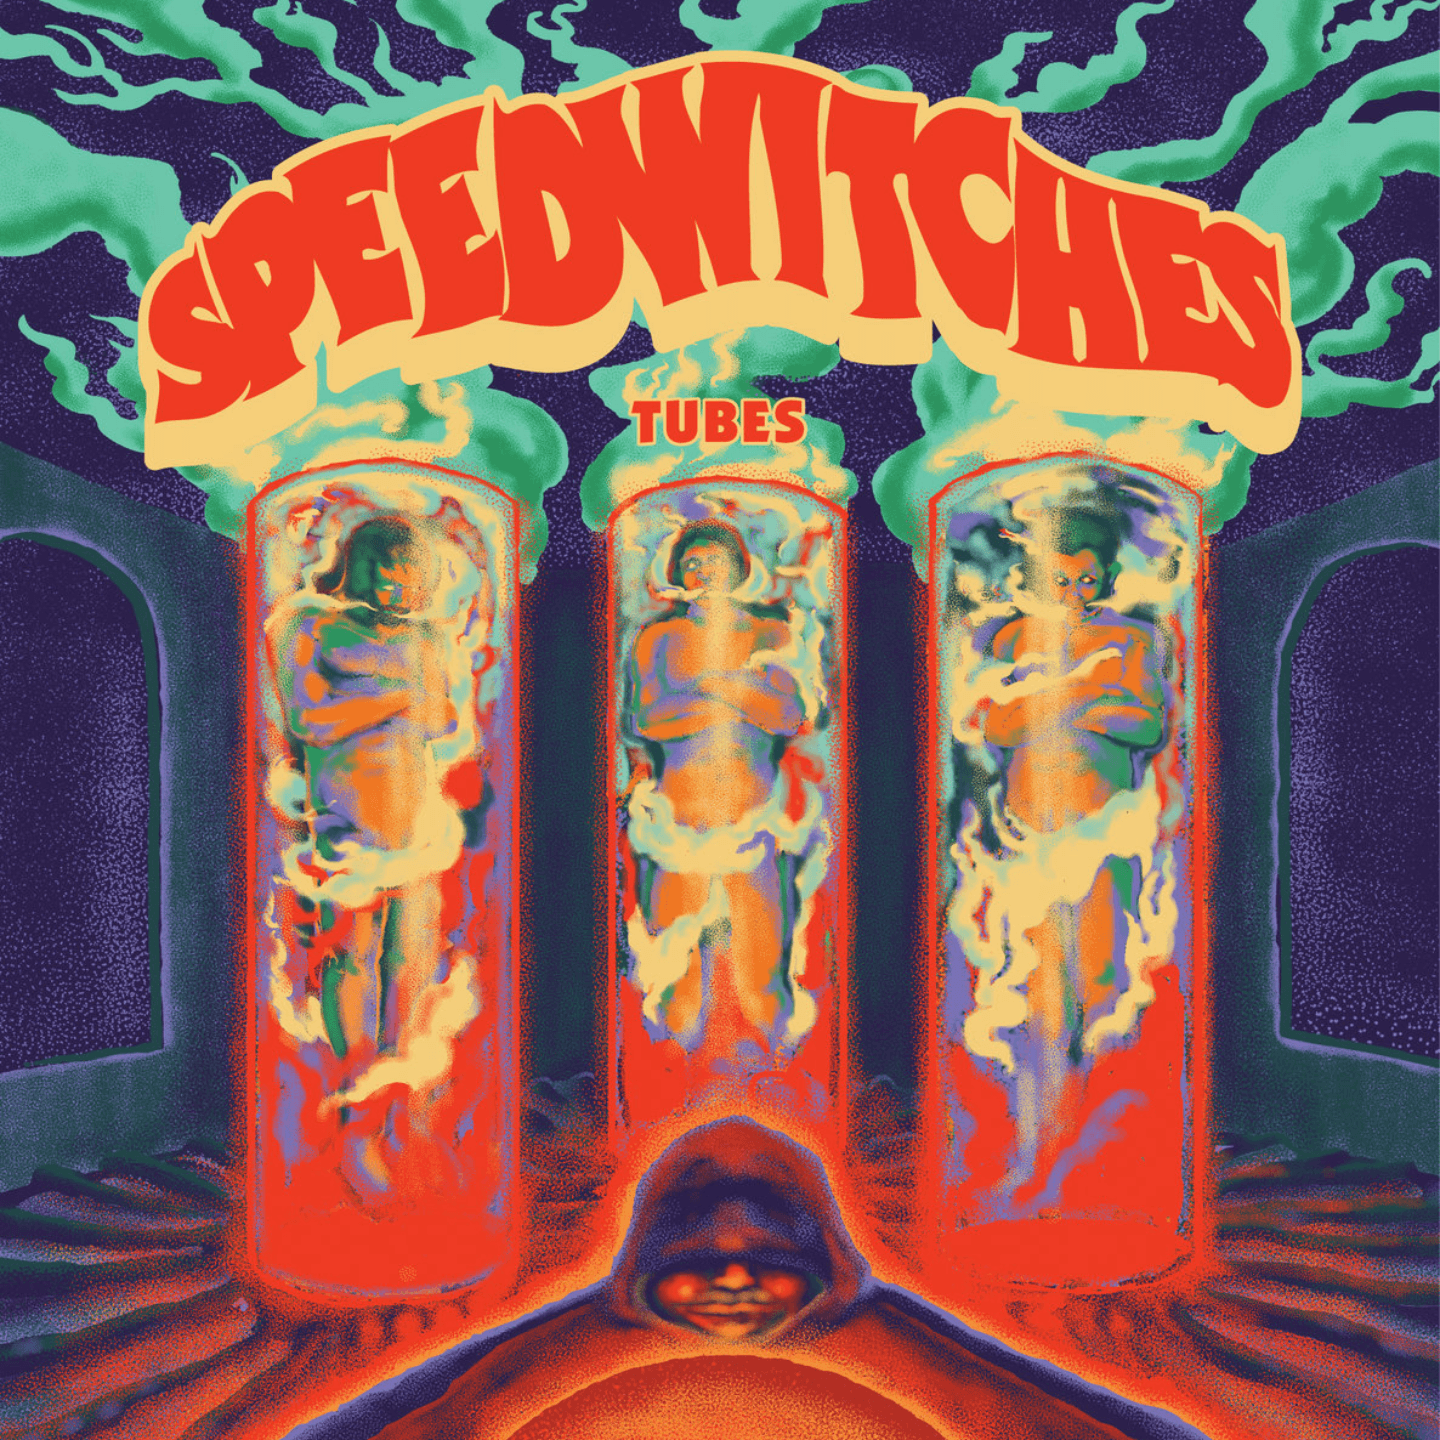 SPEEDWITCHES - Tubes LP with Poster